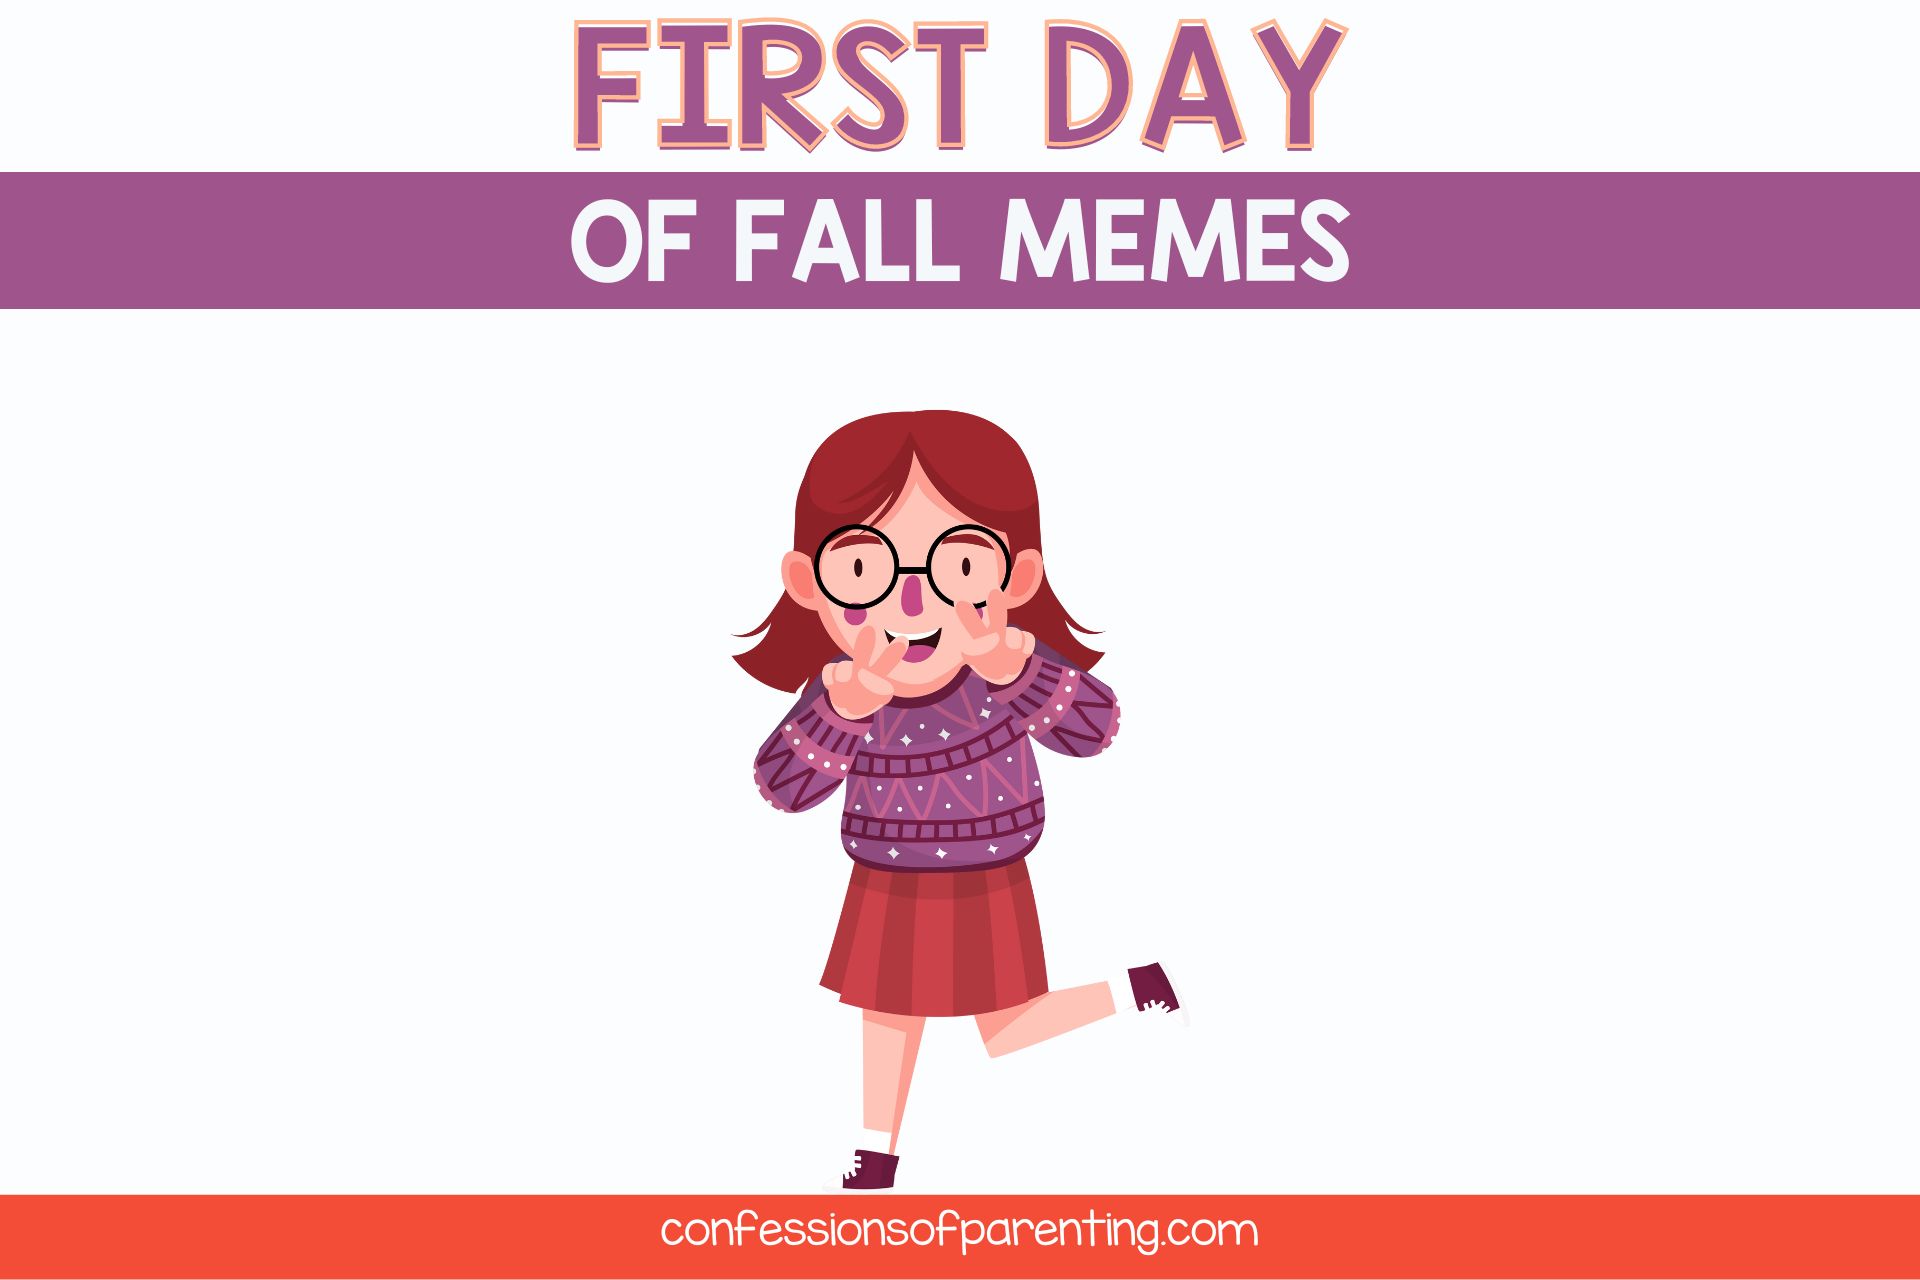 feature image: first day of fall memes